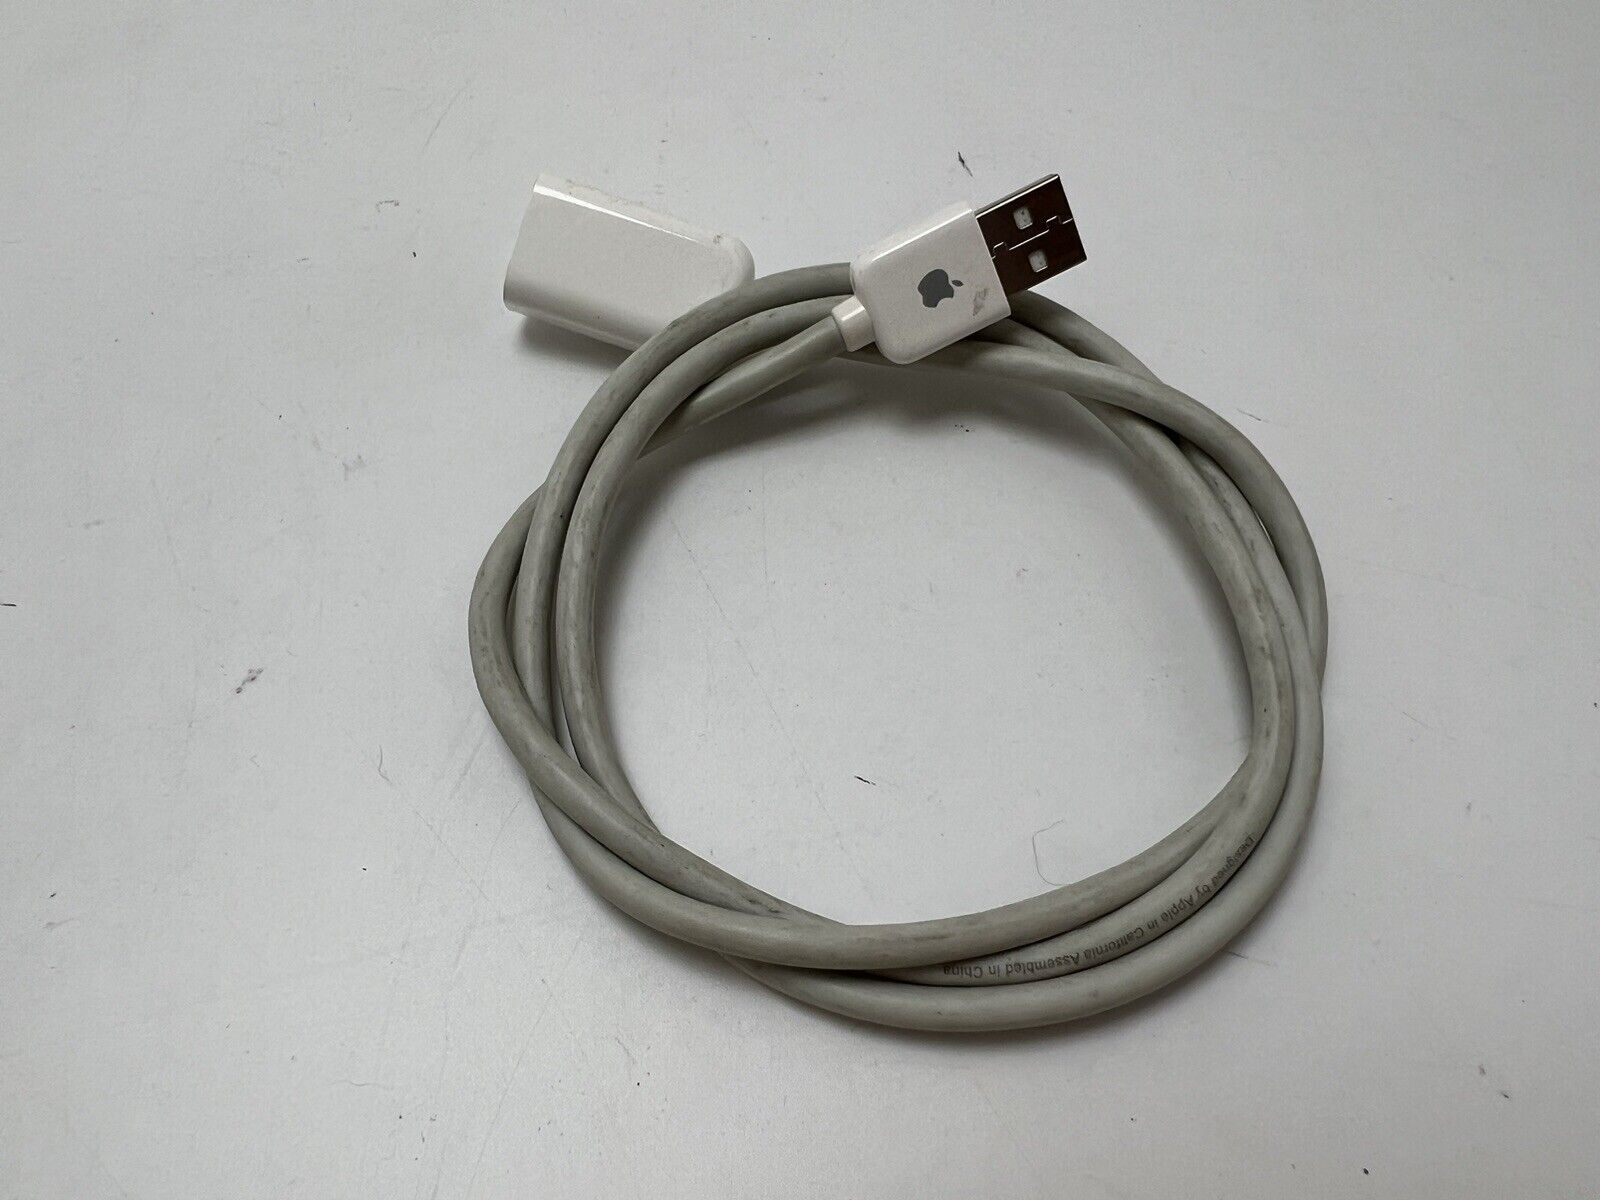 Vintage Apple USB Extension Cable with Apple Logo